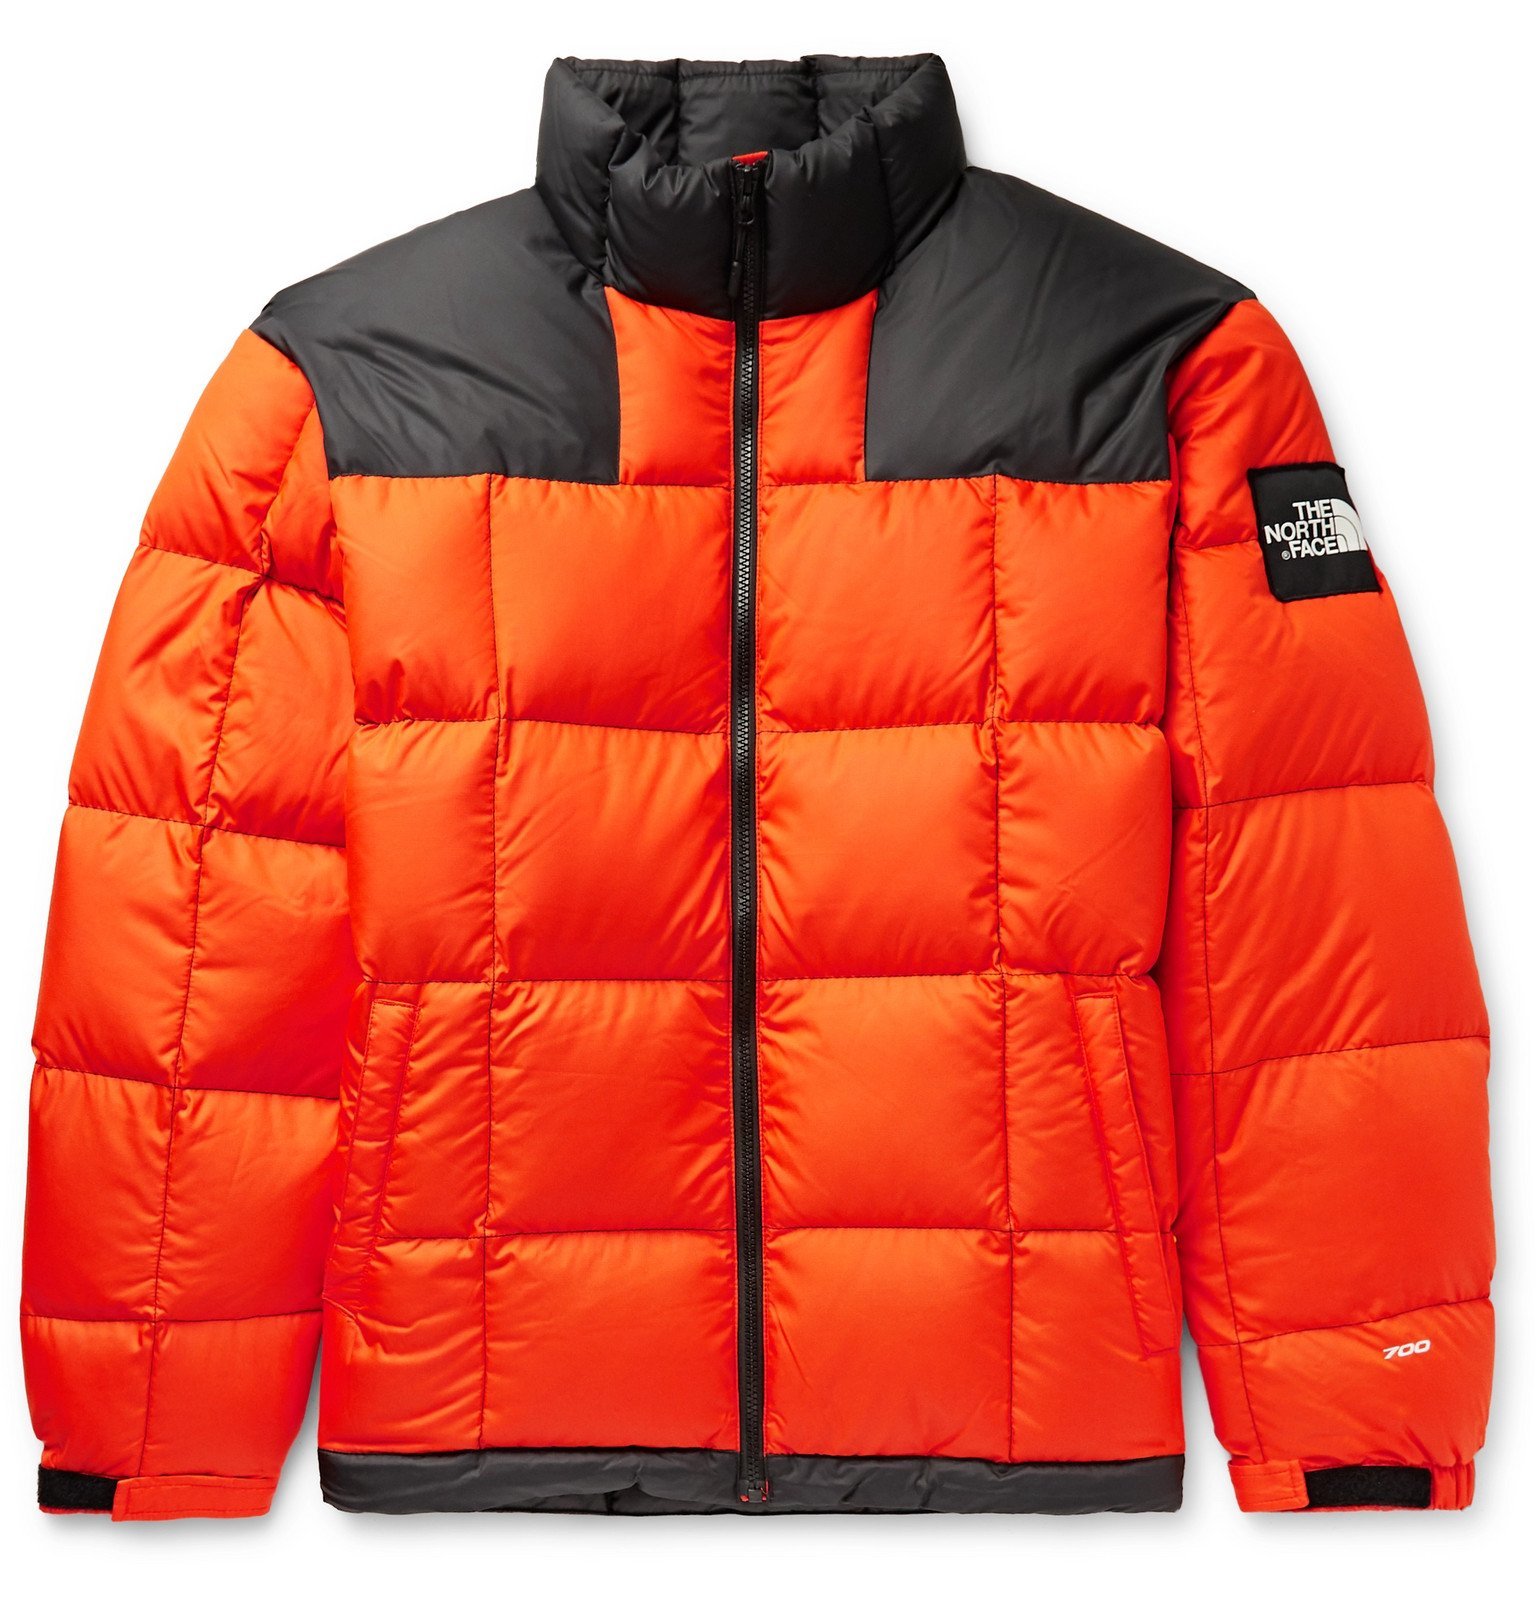 quilted ripstop down jacket